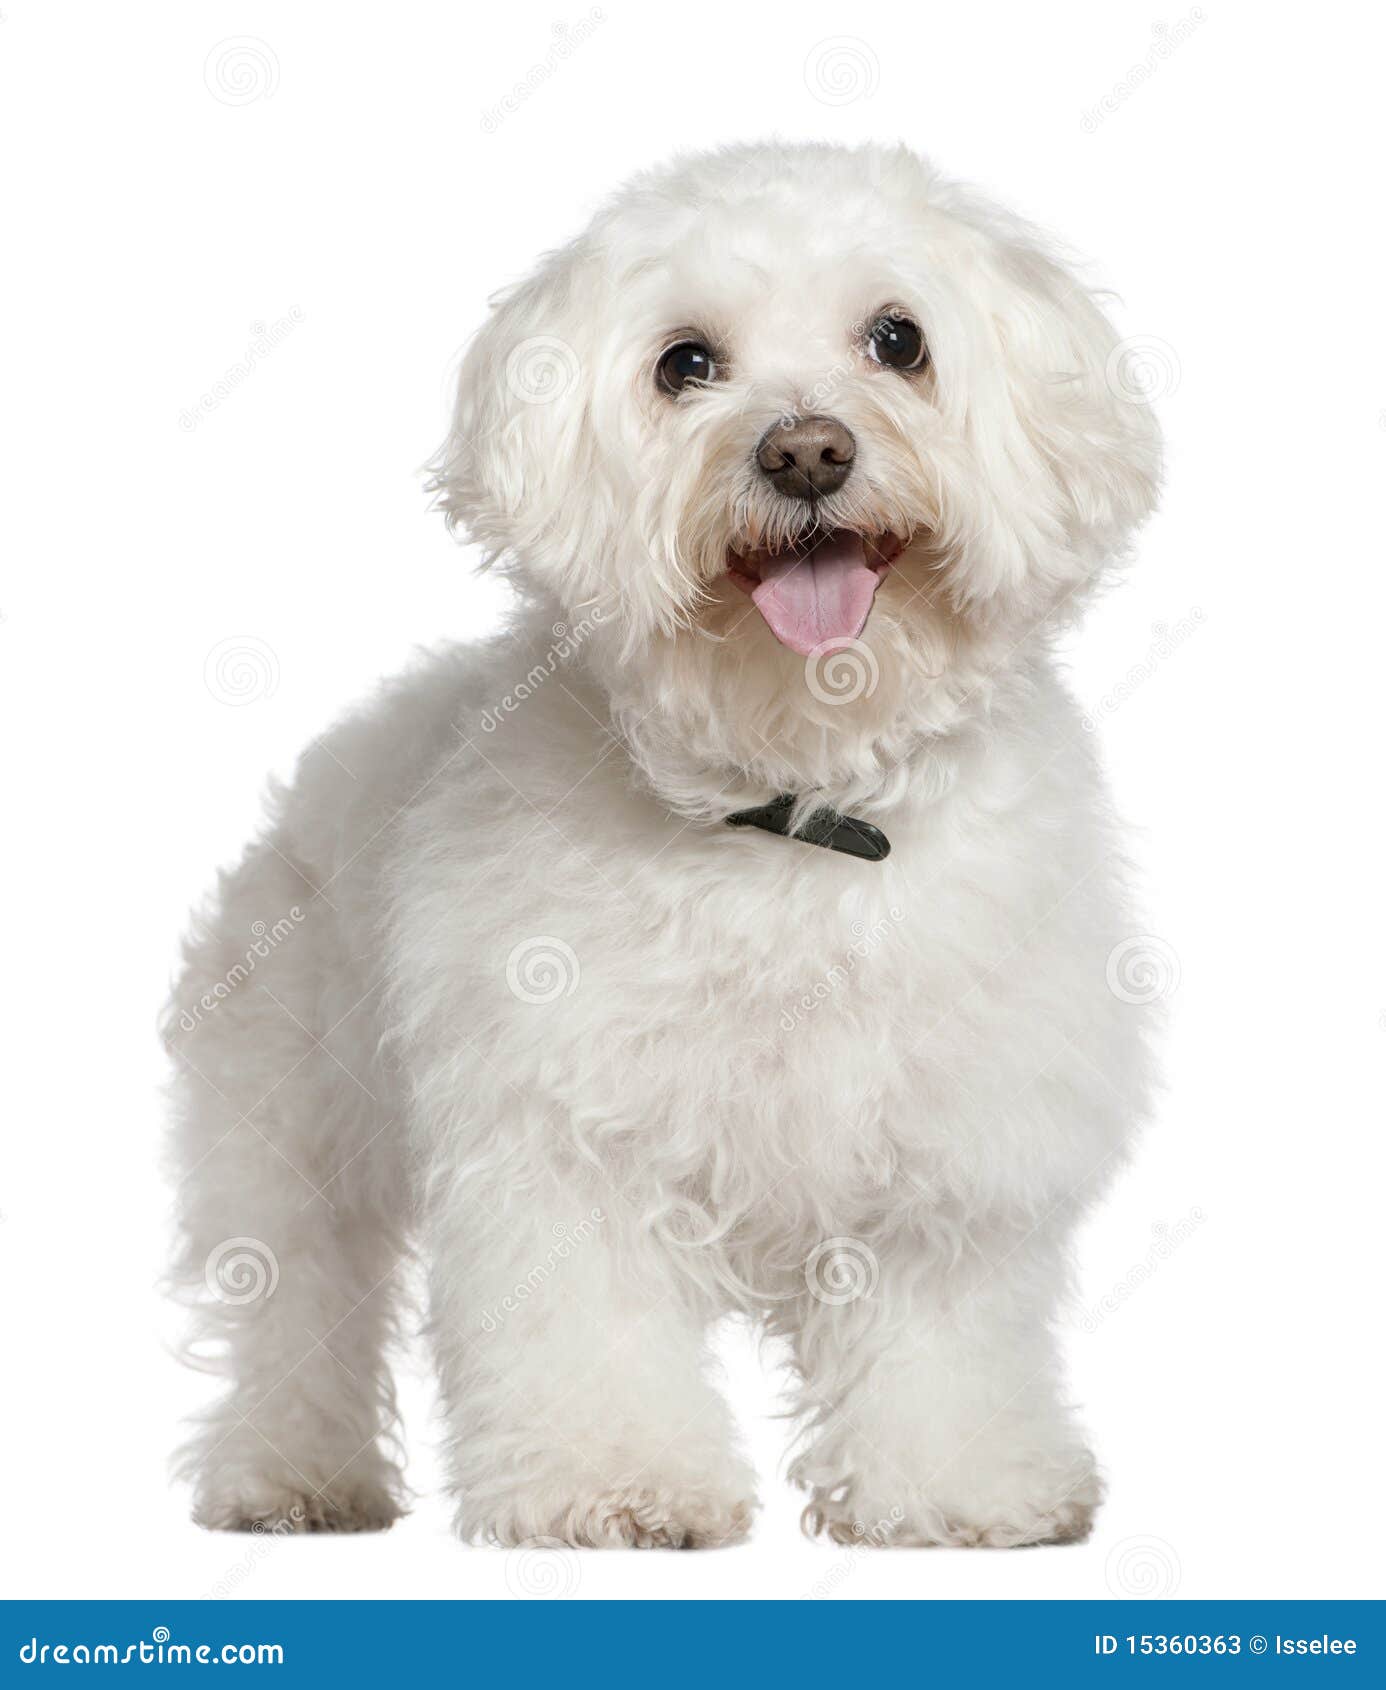 bichon frise, 13 and a half years old, standing